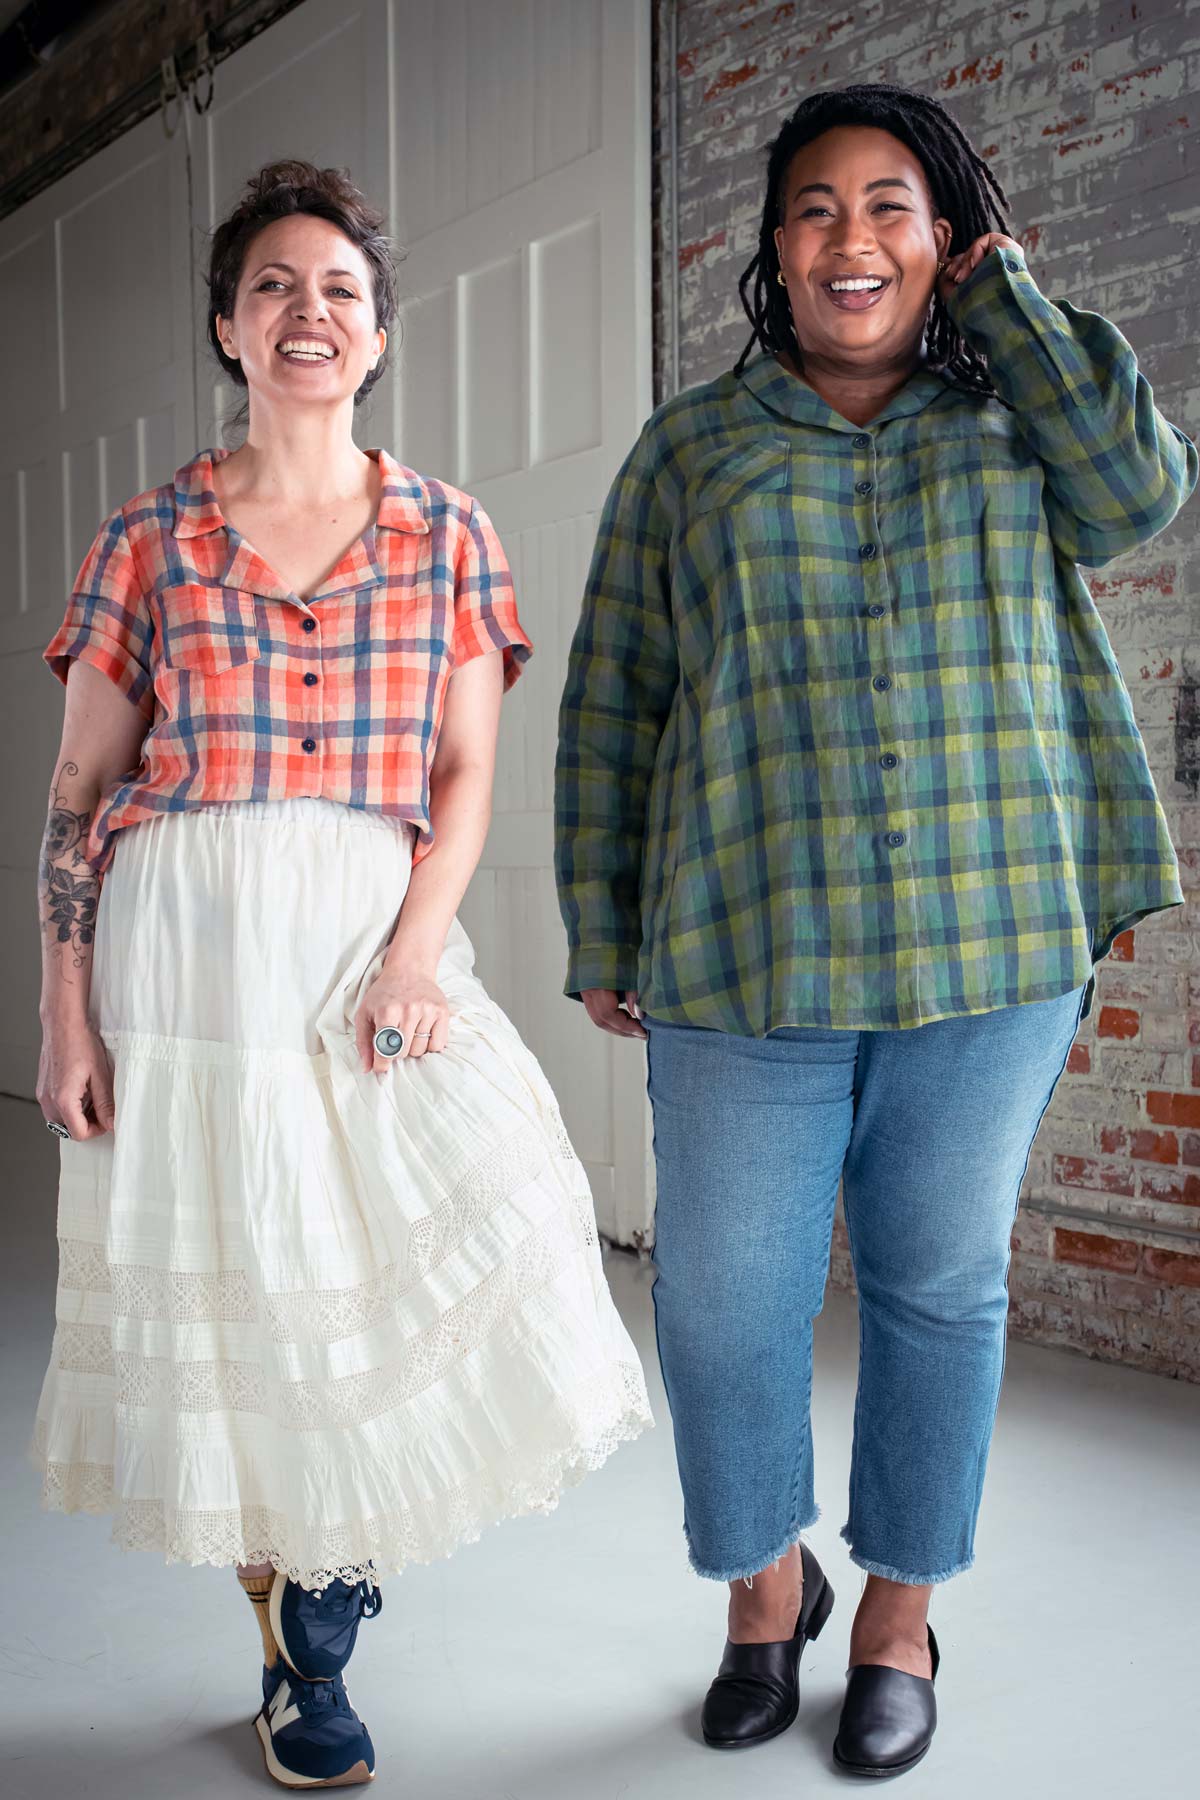 Meg and Ashley wear plaid Joanies, Meg with a white skirt and Ashley with jeans. They smile in front of a brick wall and white door